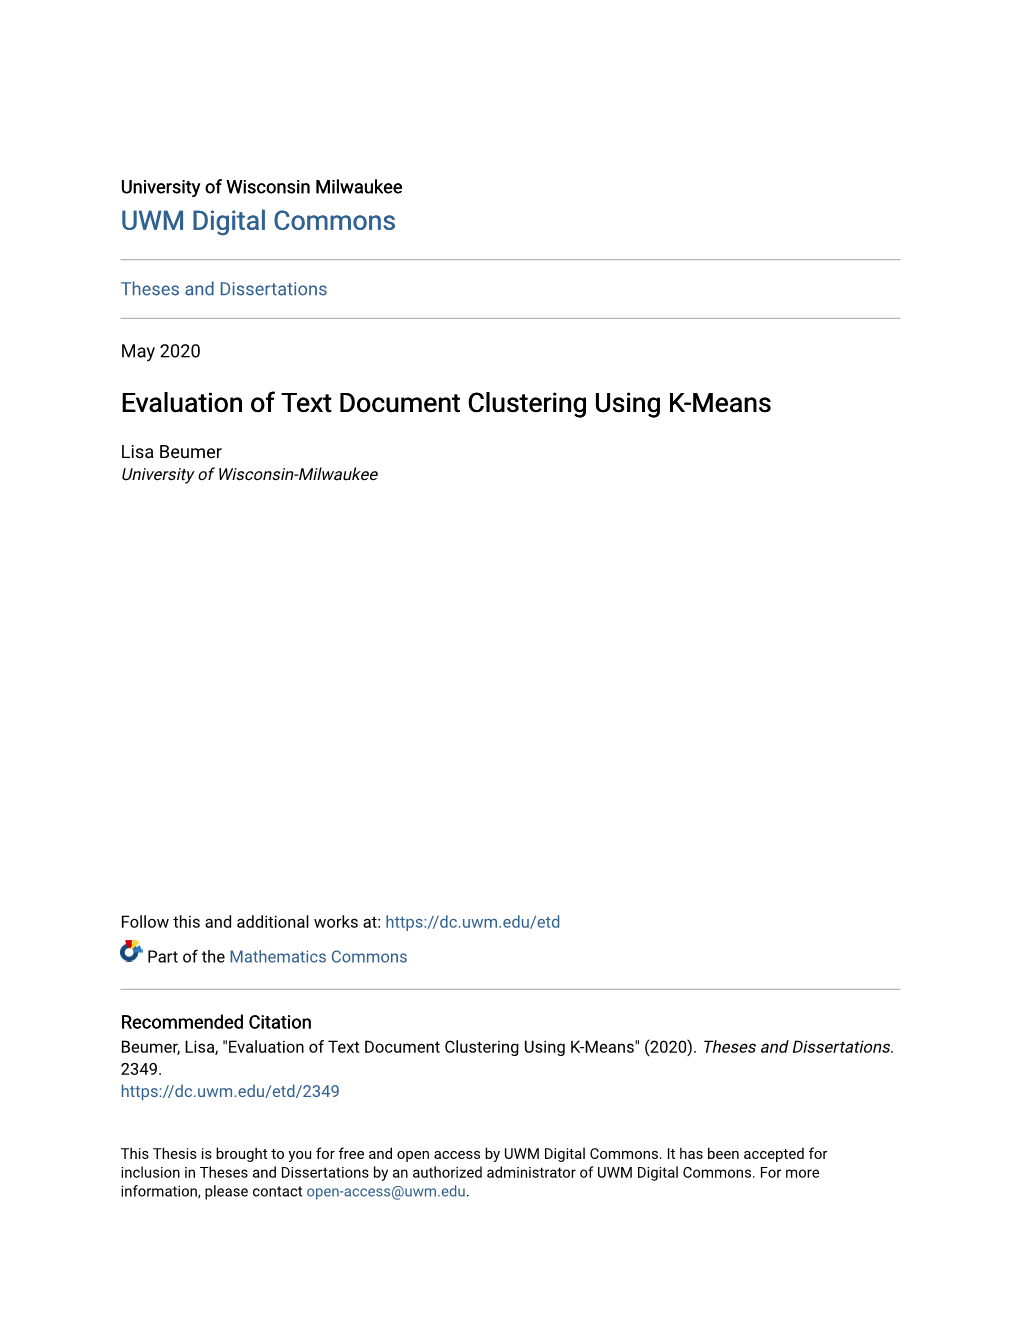 Evaluation of Text Document Clustering Using K-Means